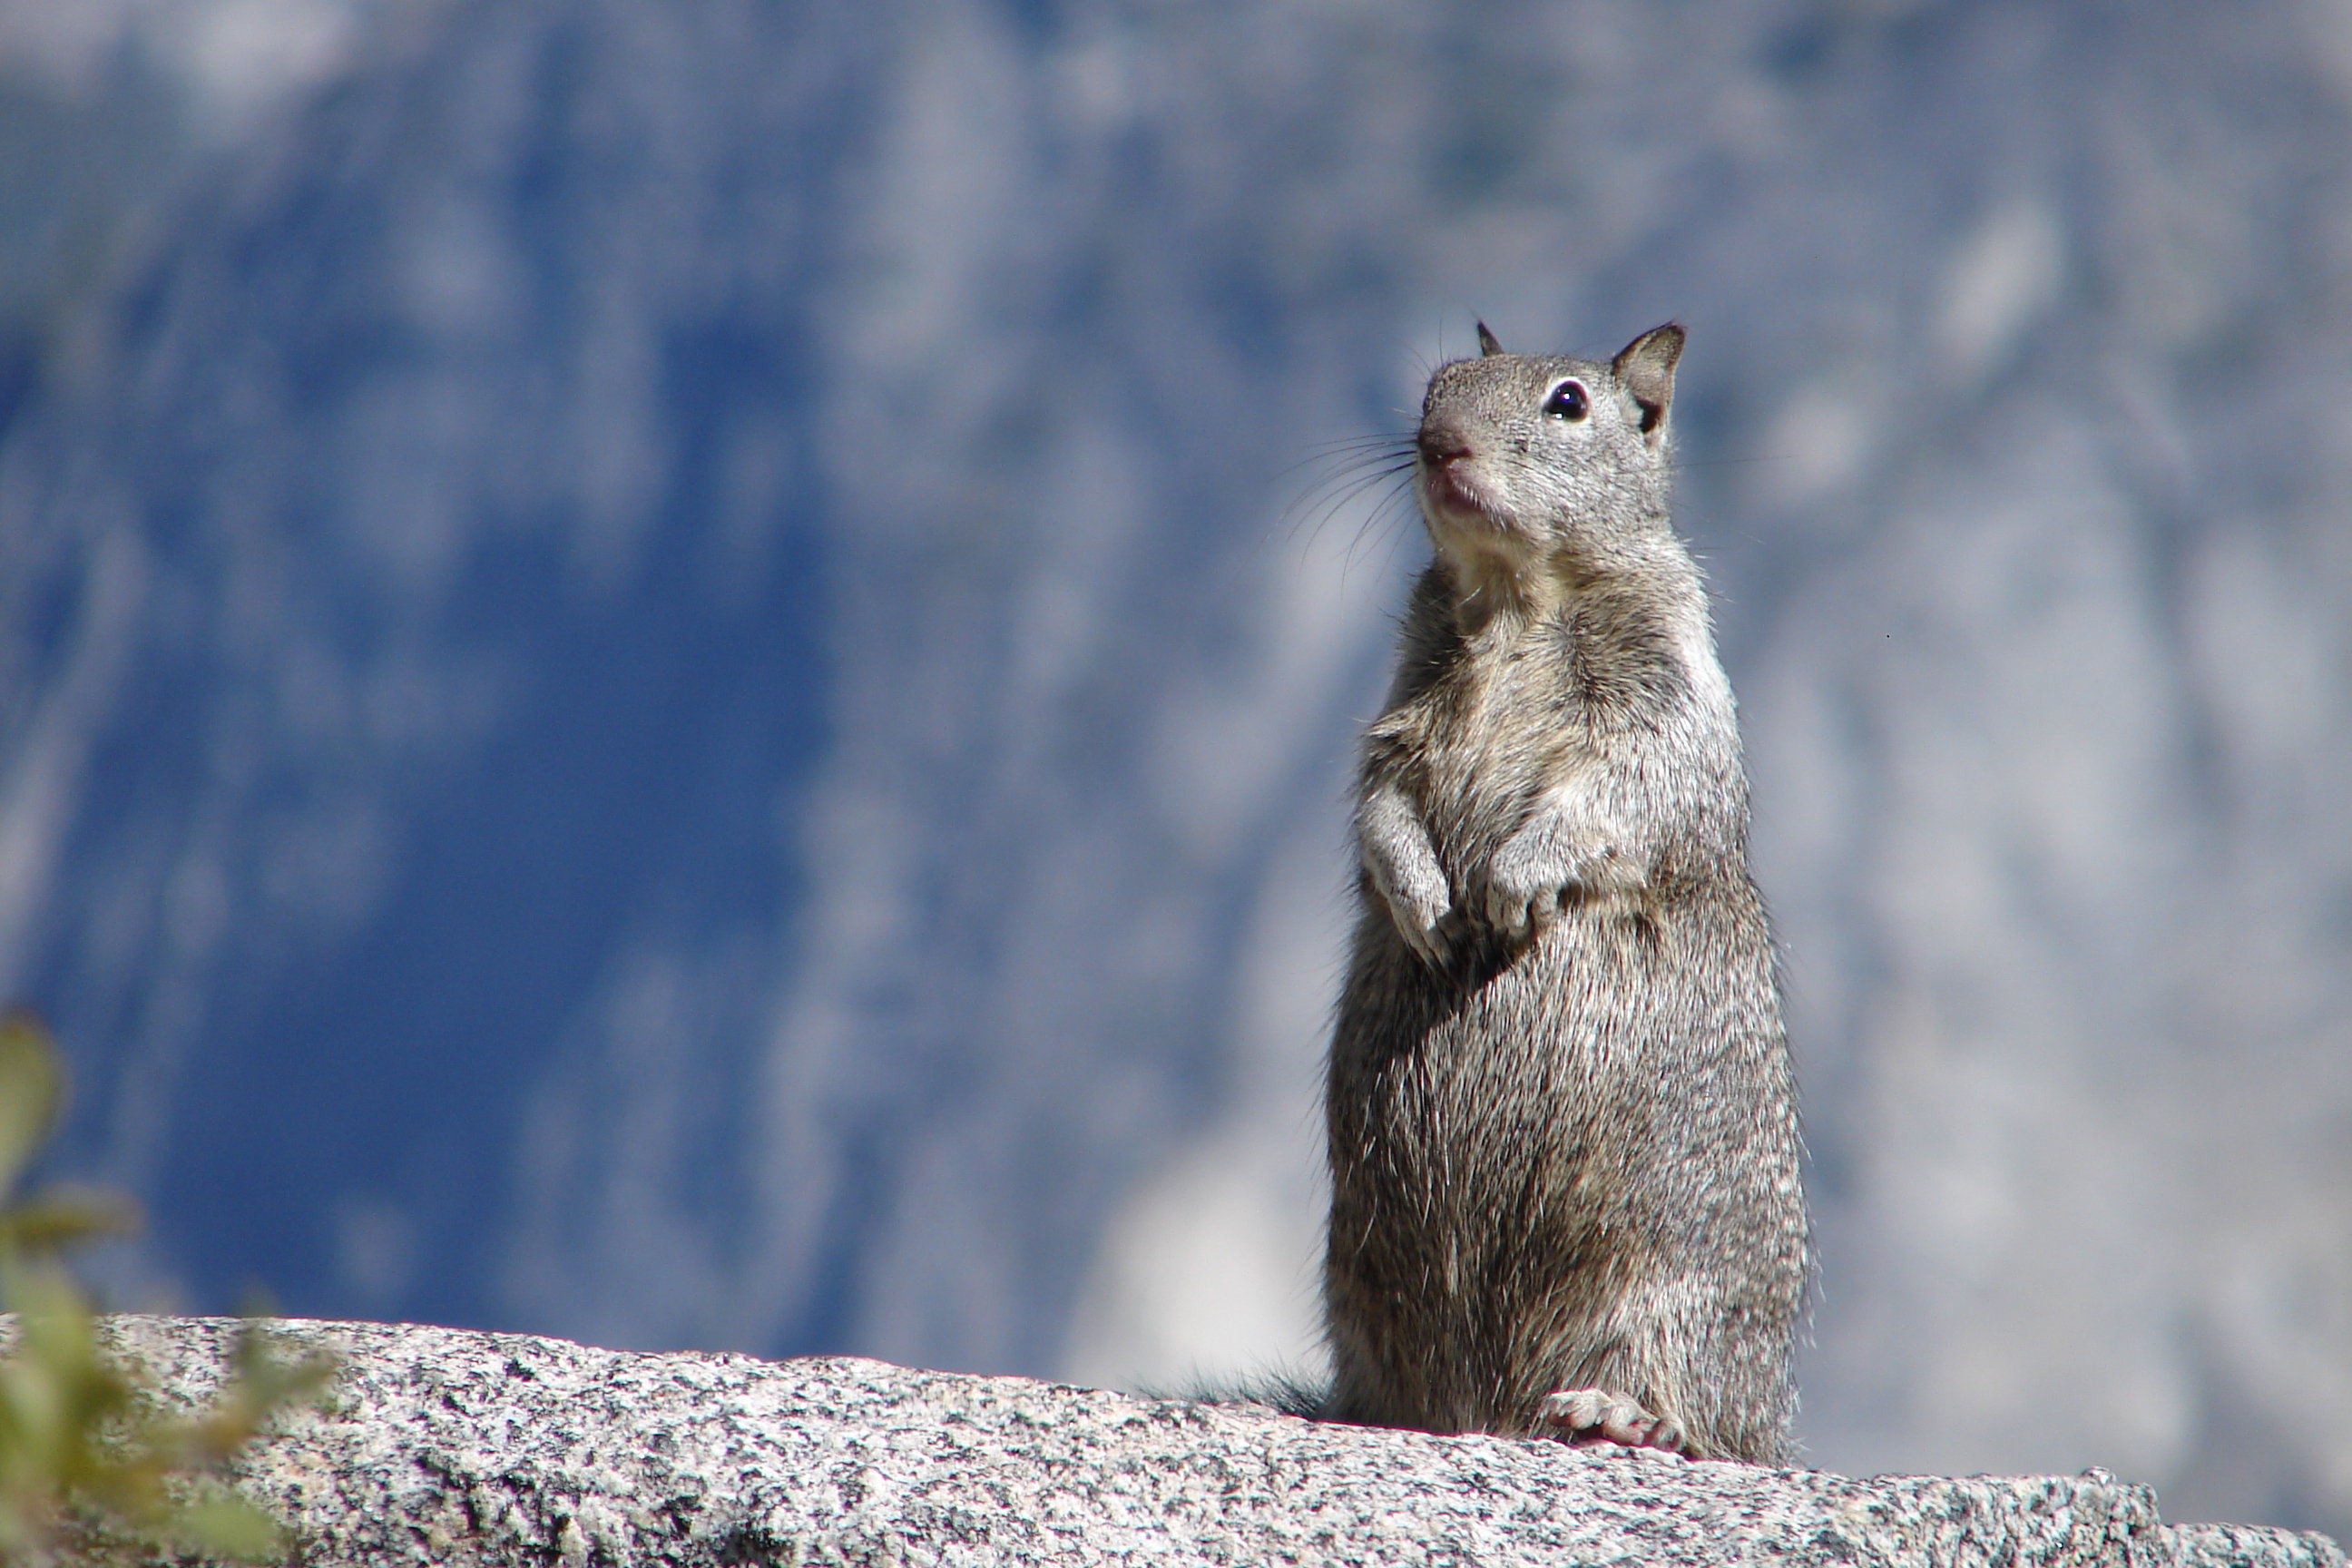 Squirrel from Yosemite State Park